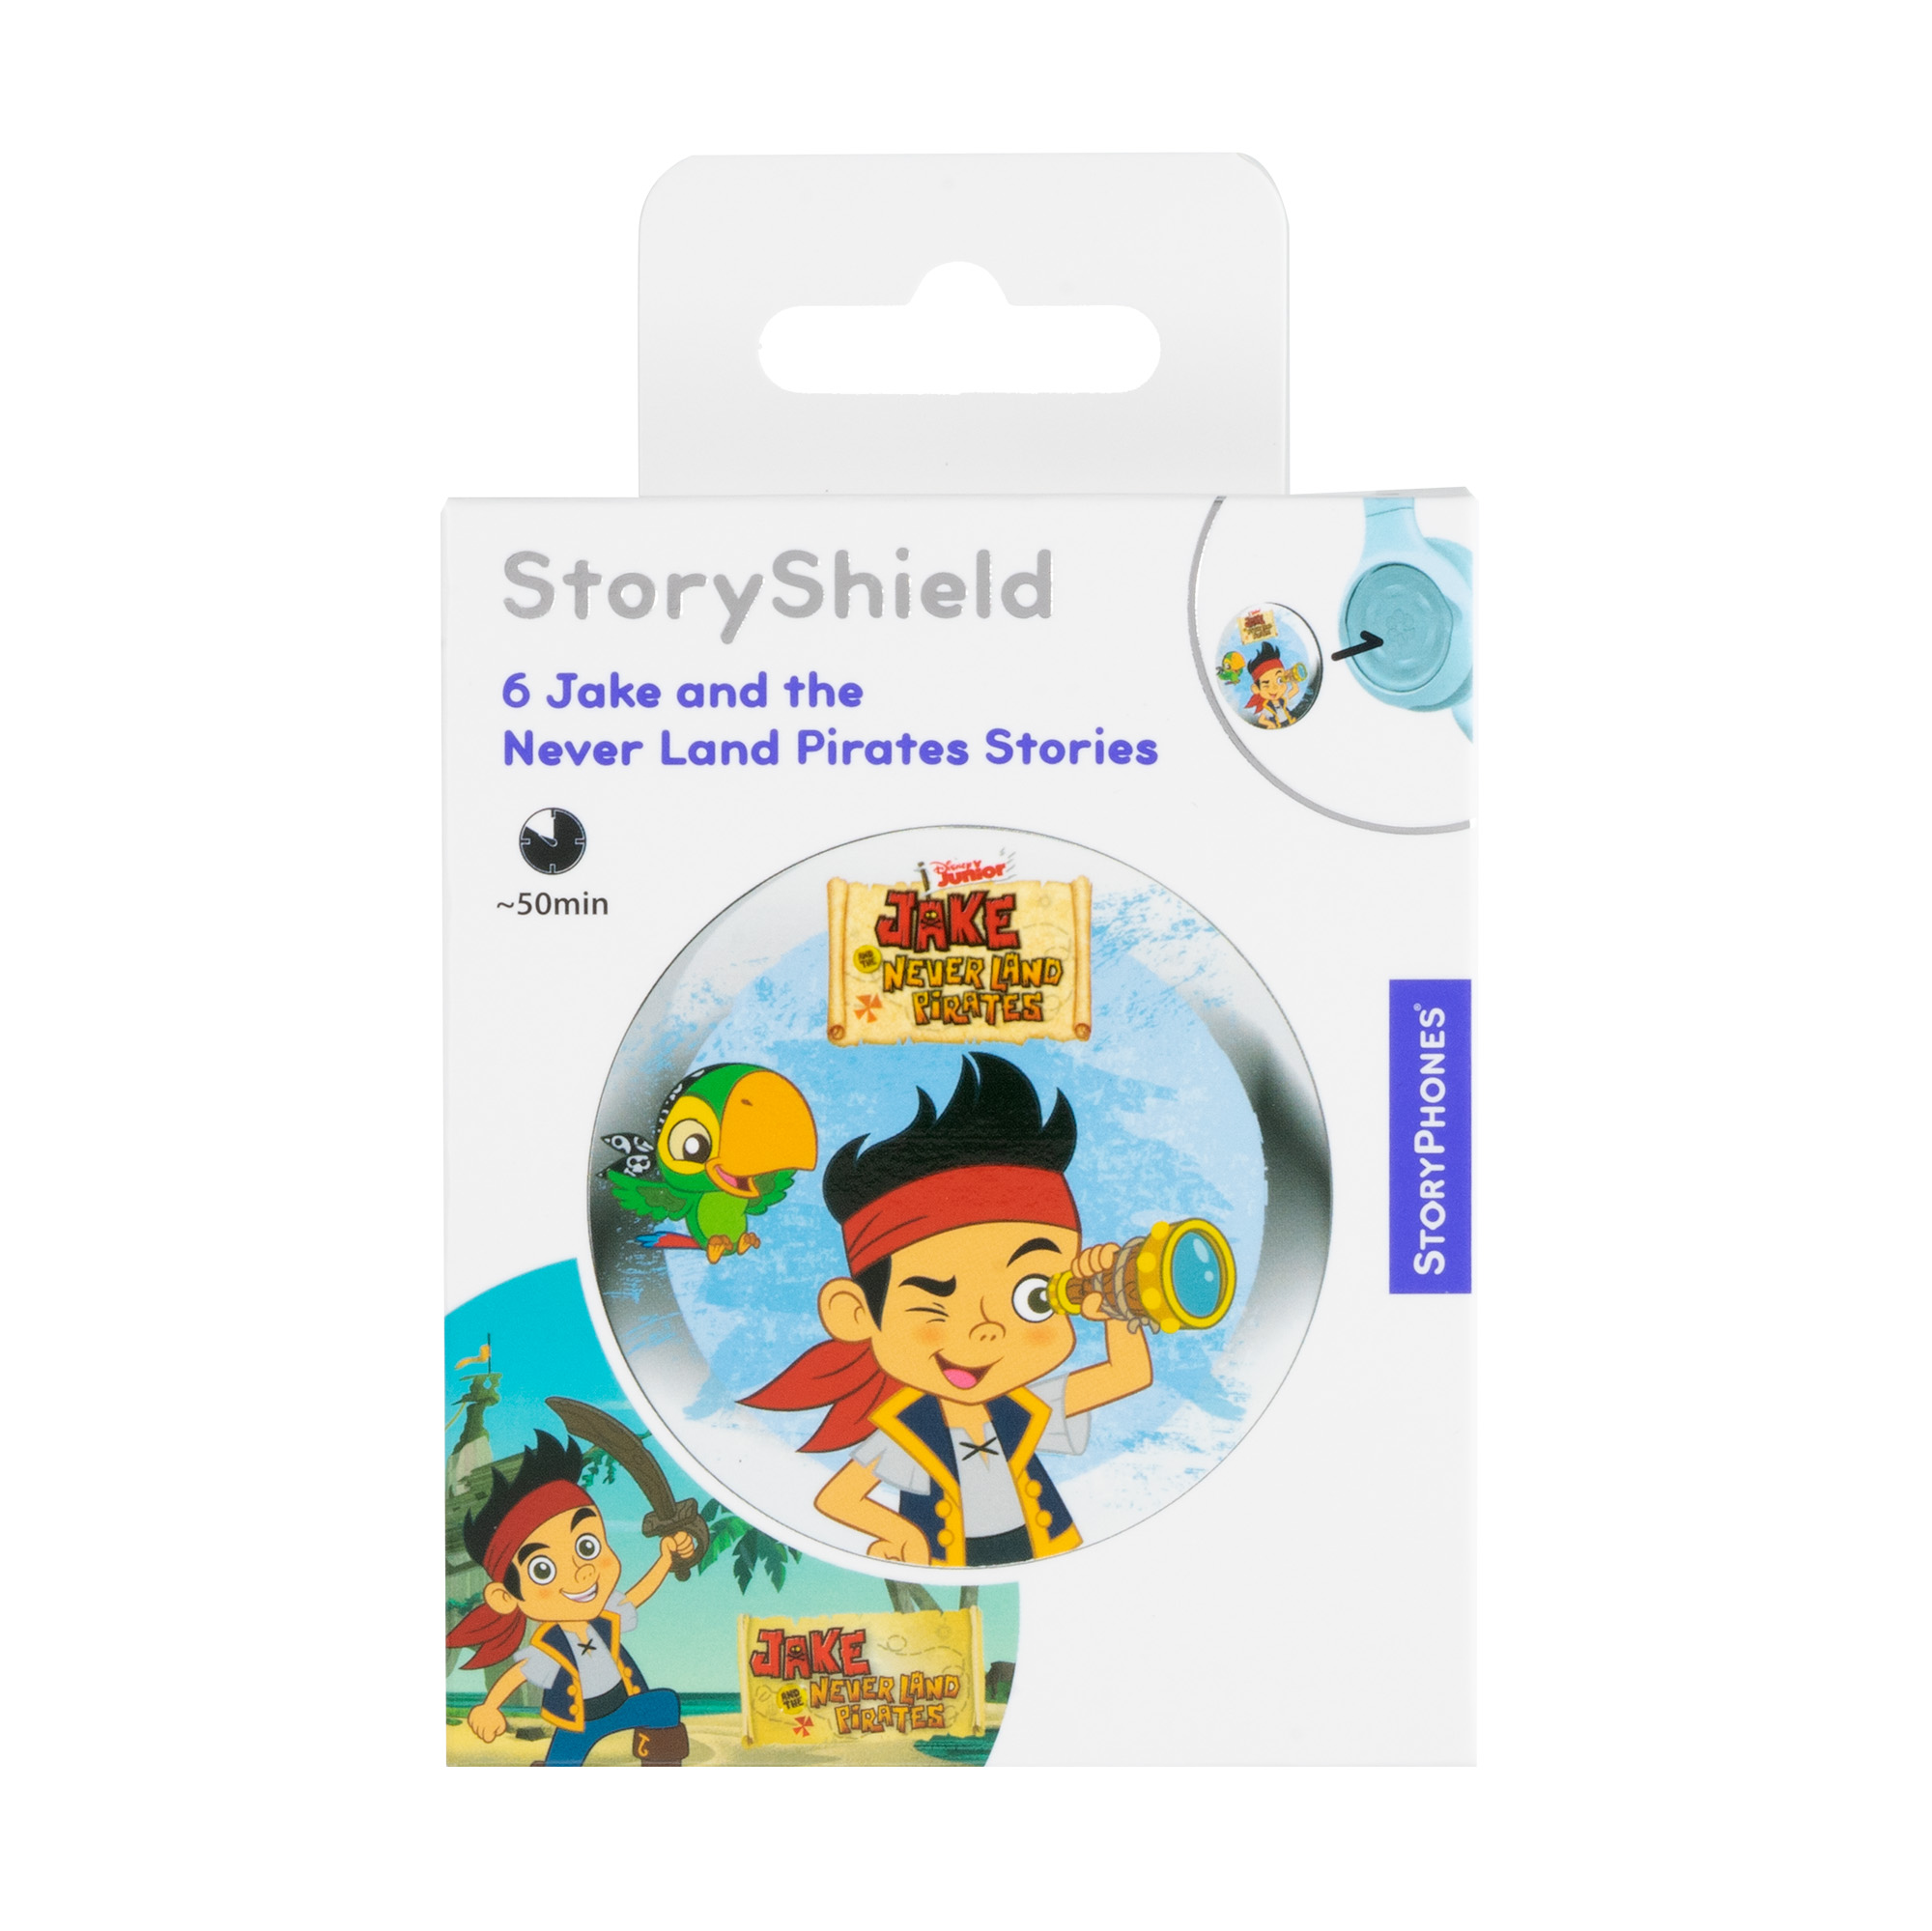  StoryShield - Disney \'Jake Story Pirates\' StoryPhones the Never para - and - Land (Download Audio Track) Audio